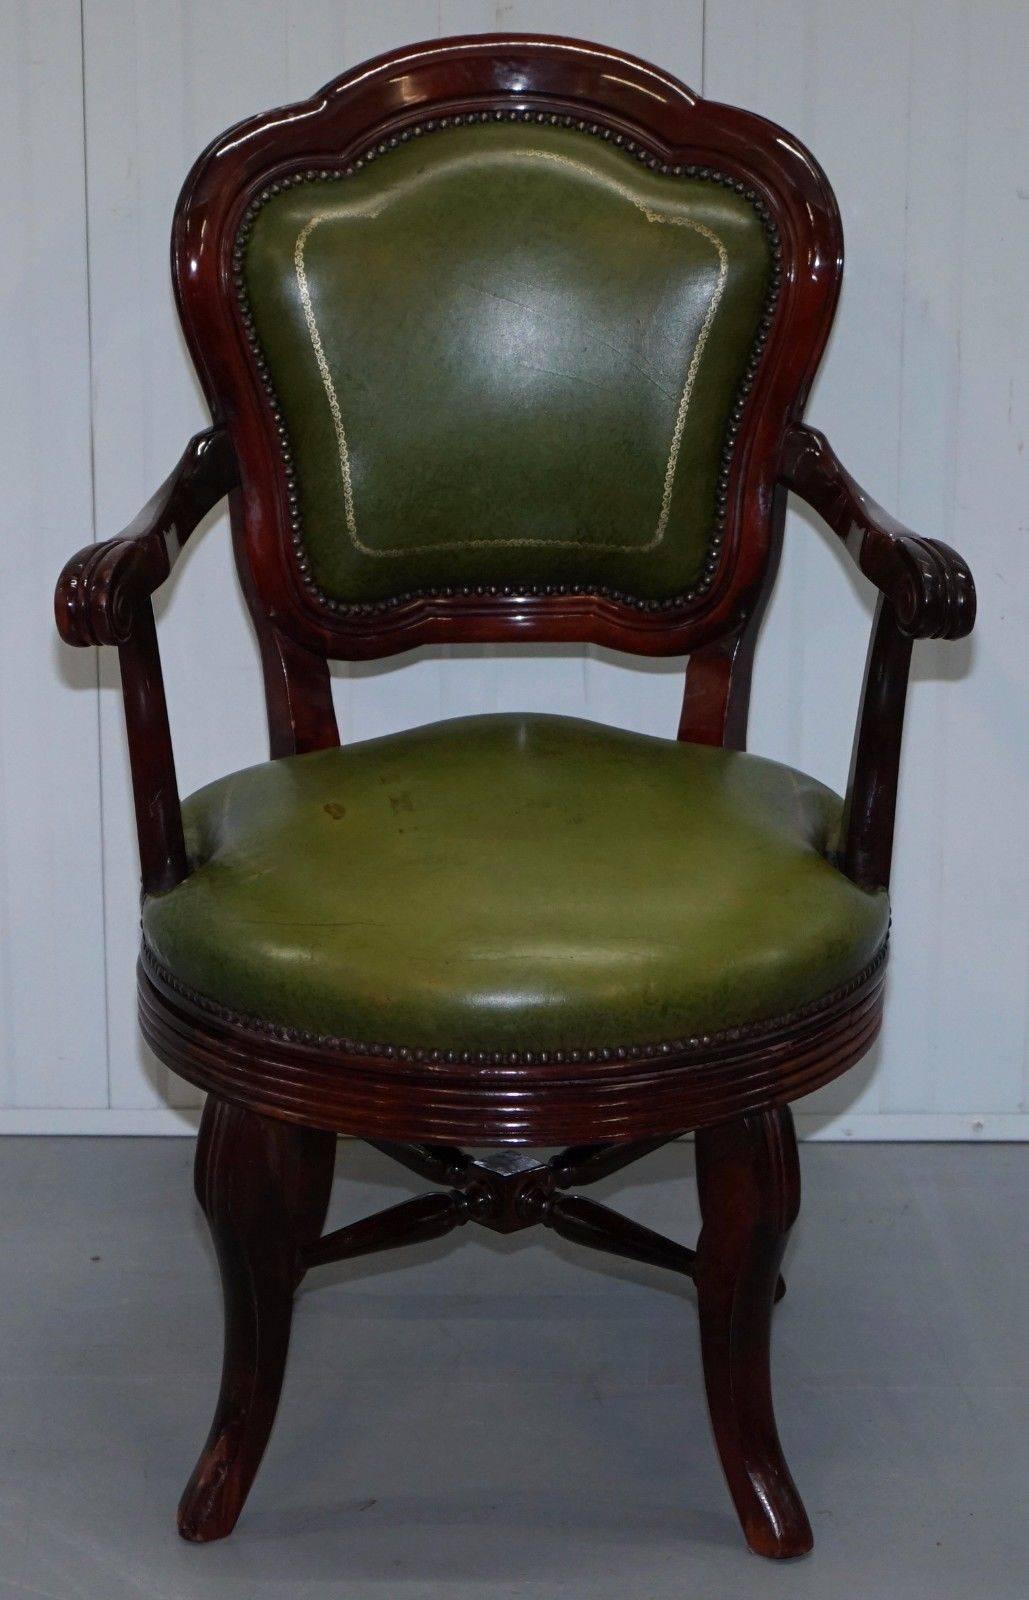 We are delighted to offer for sale this vintage aged green leather with gold tooling and mahogany frame office swivel chair

A really good looking and comfortable vintage chair, the base sits on an old fashion rail swivel system, it’s just about